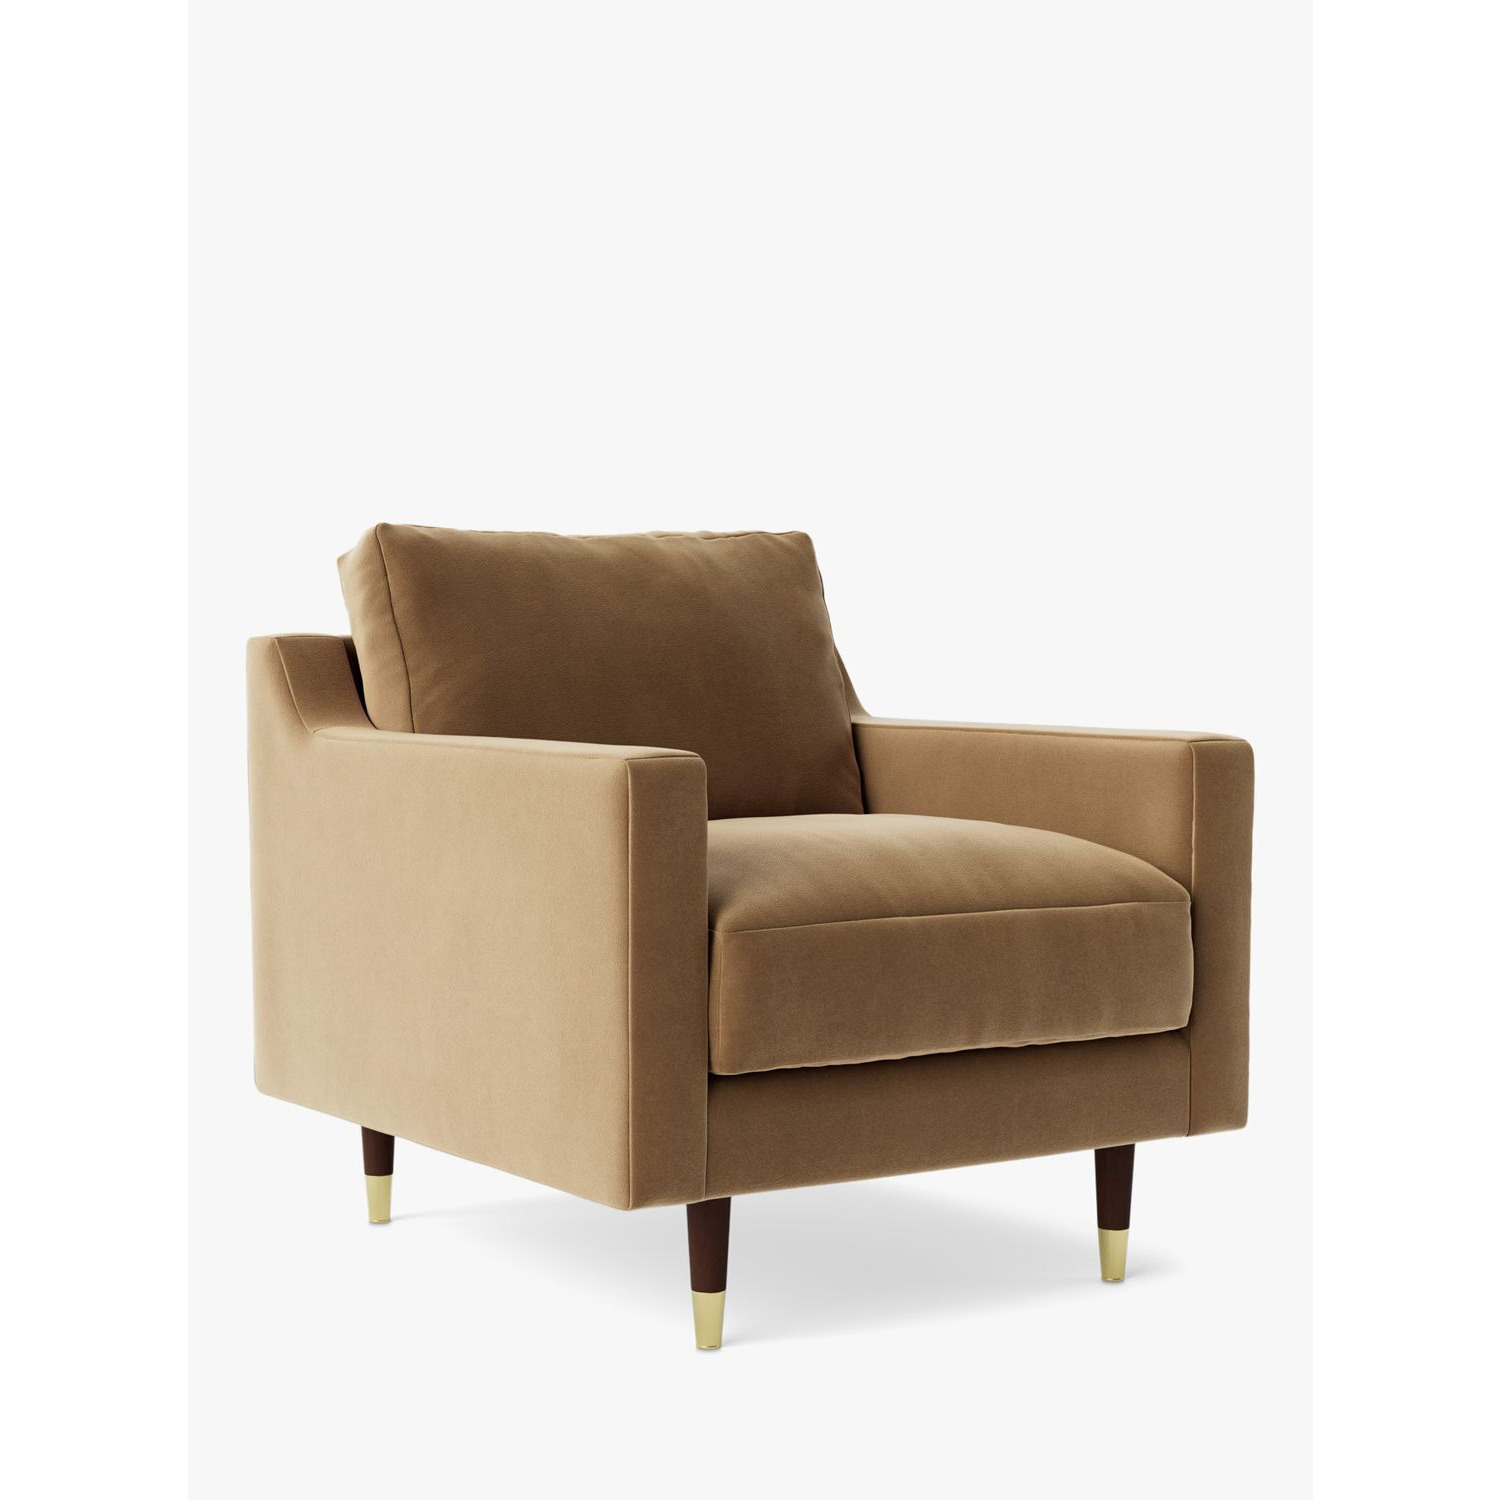 Swoon Rieti Armchair - image 1